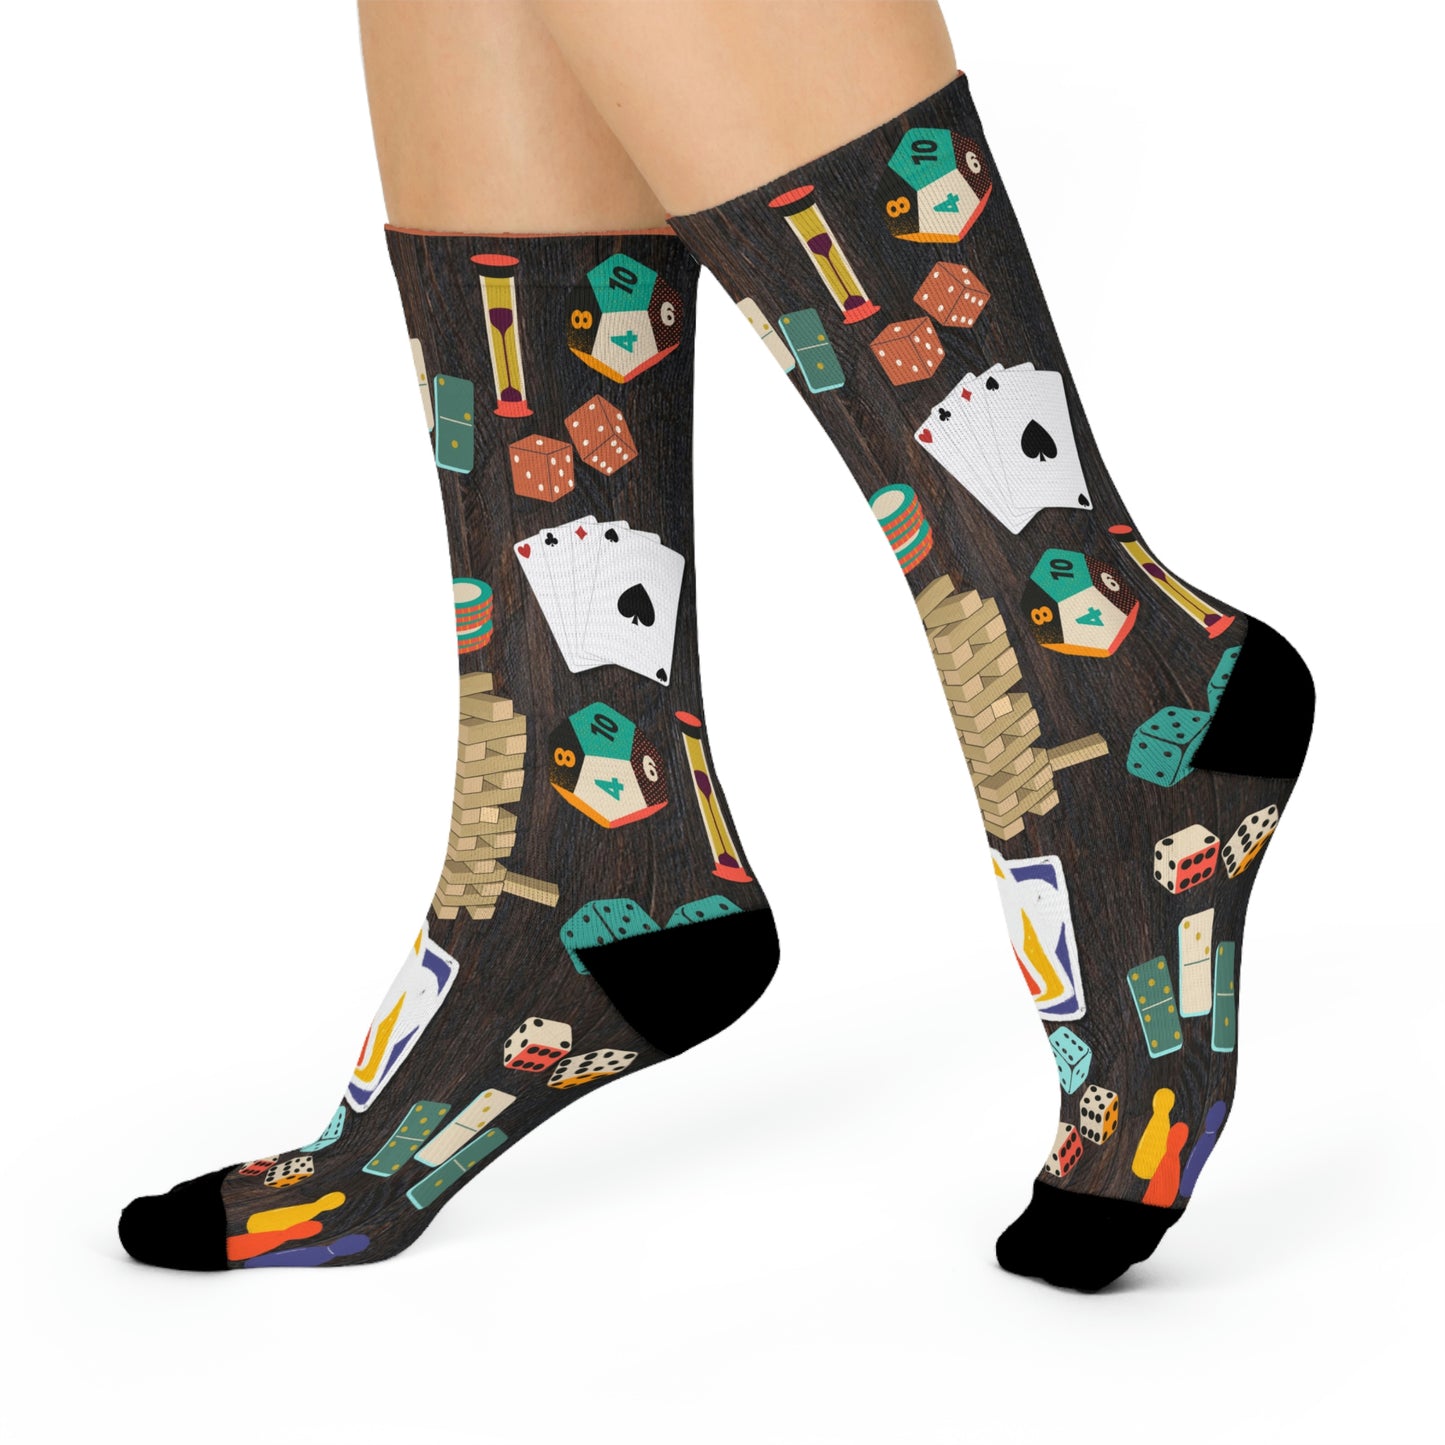 Family Game Night Socks Fun at Large! Unisex Adult Stretchy Mid Calf Original